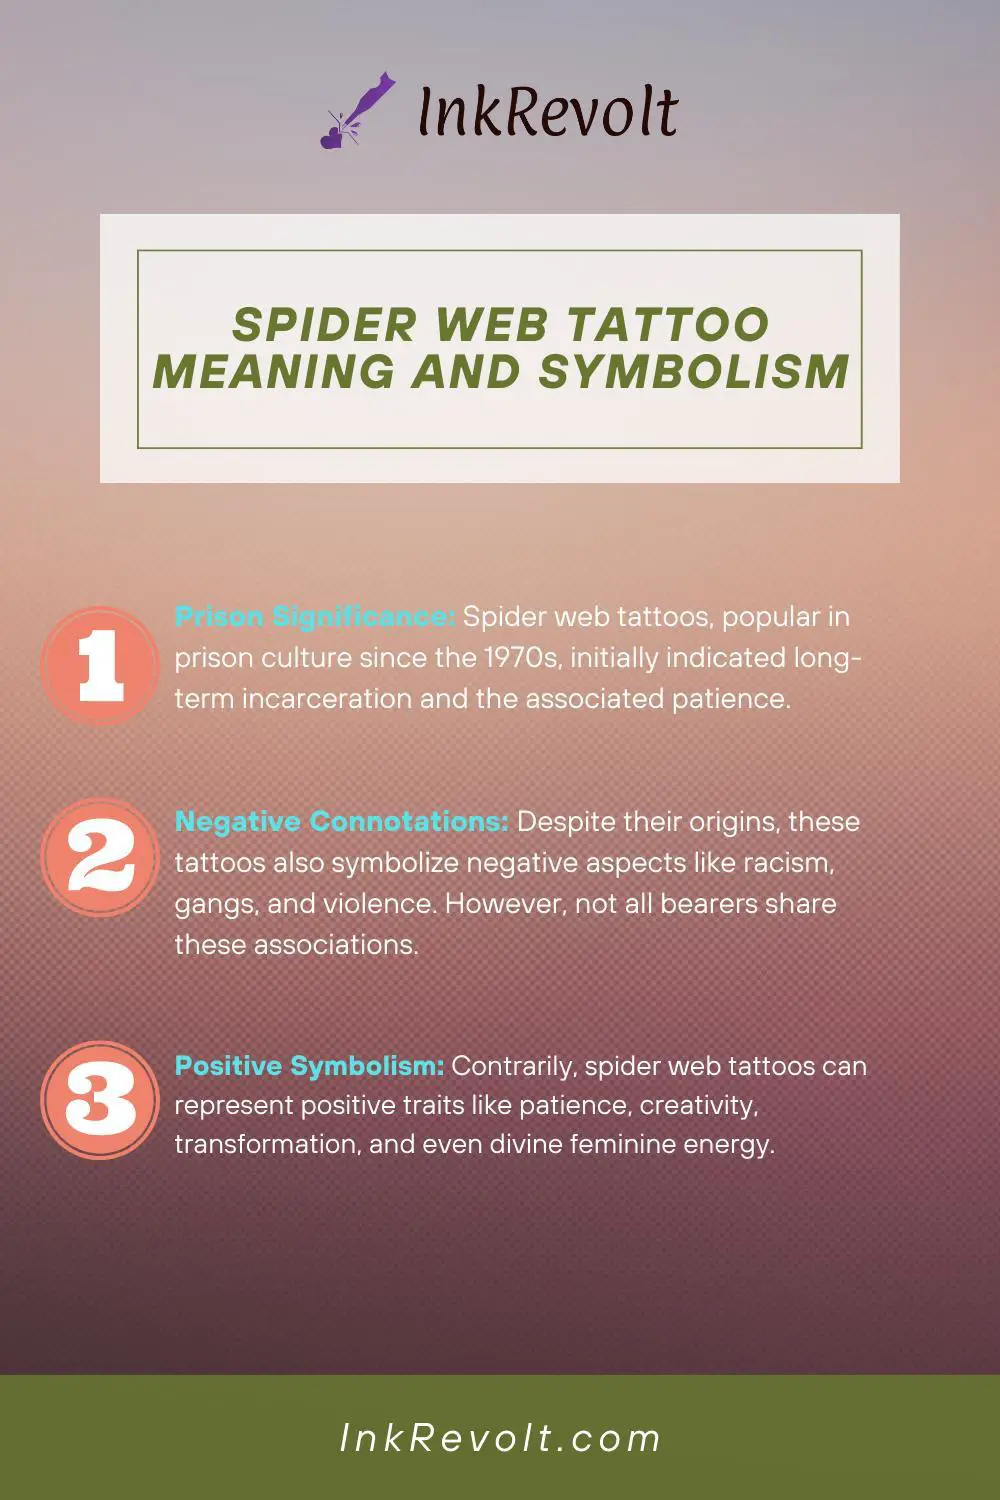 Spider Web Tattoo Meaning And Symbolism - Infographic